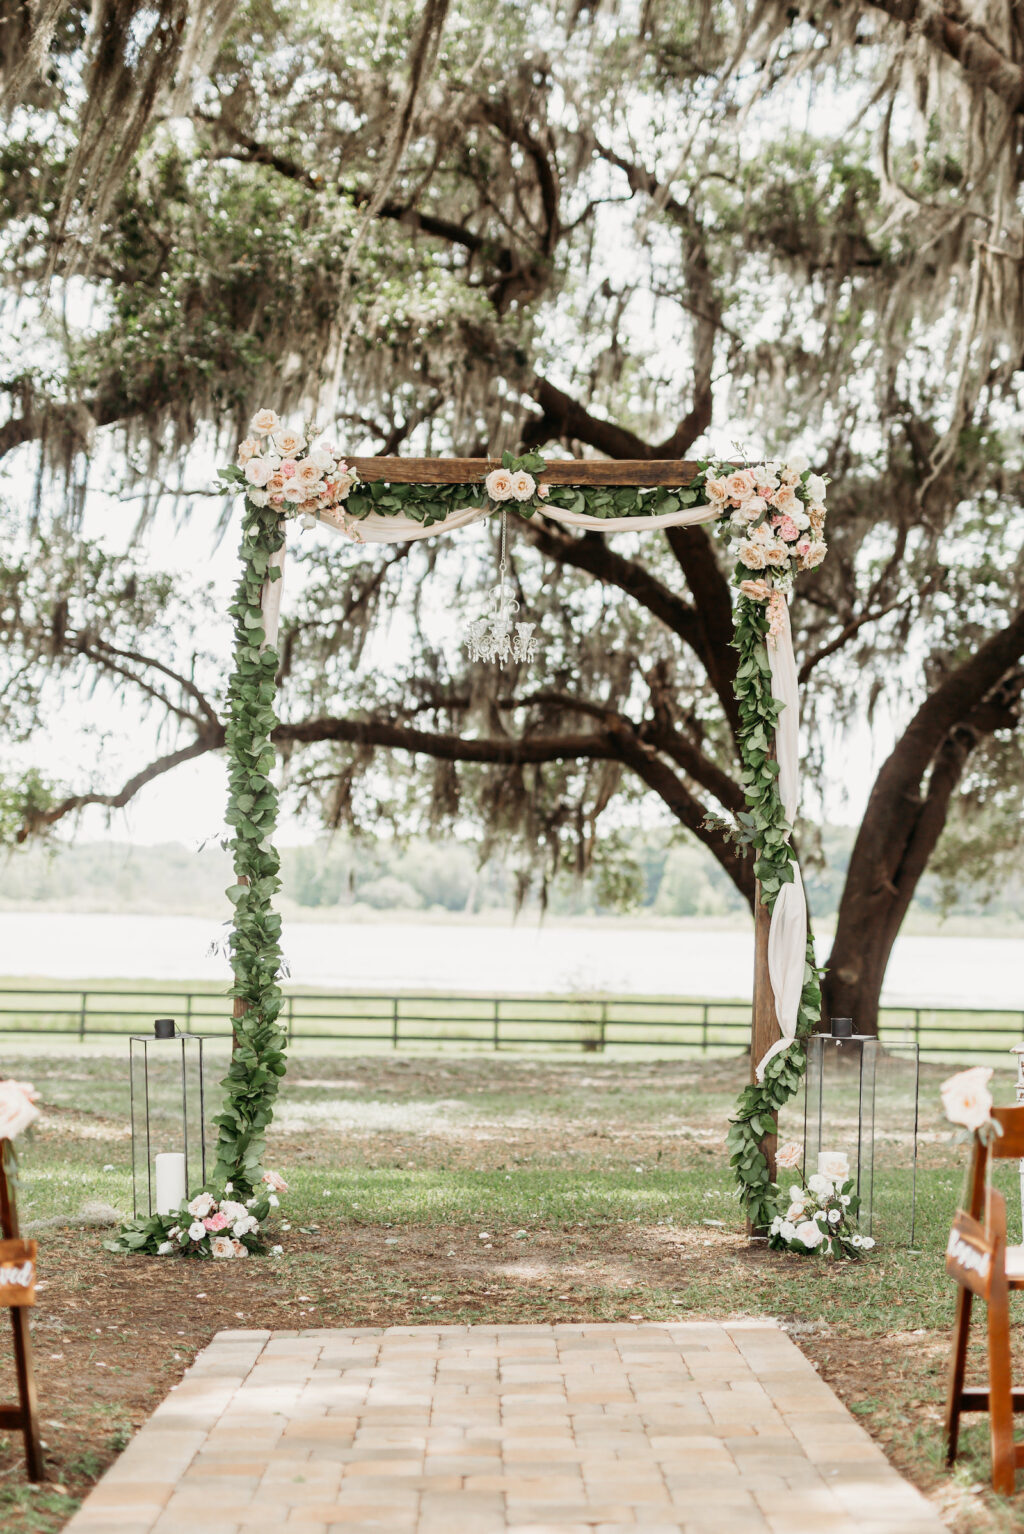 Wooden Wedding Ceremony Arch with Greenery Detail, Florals, and Drapery for Rustic Ceremony | Covington Farms Florida Wedding Venue